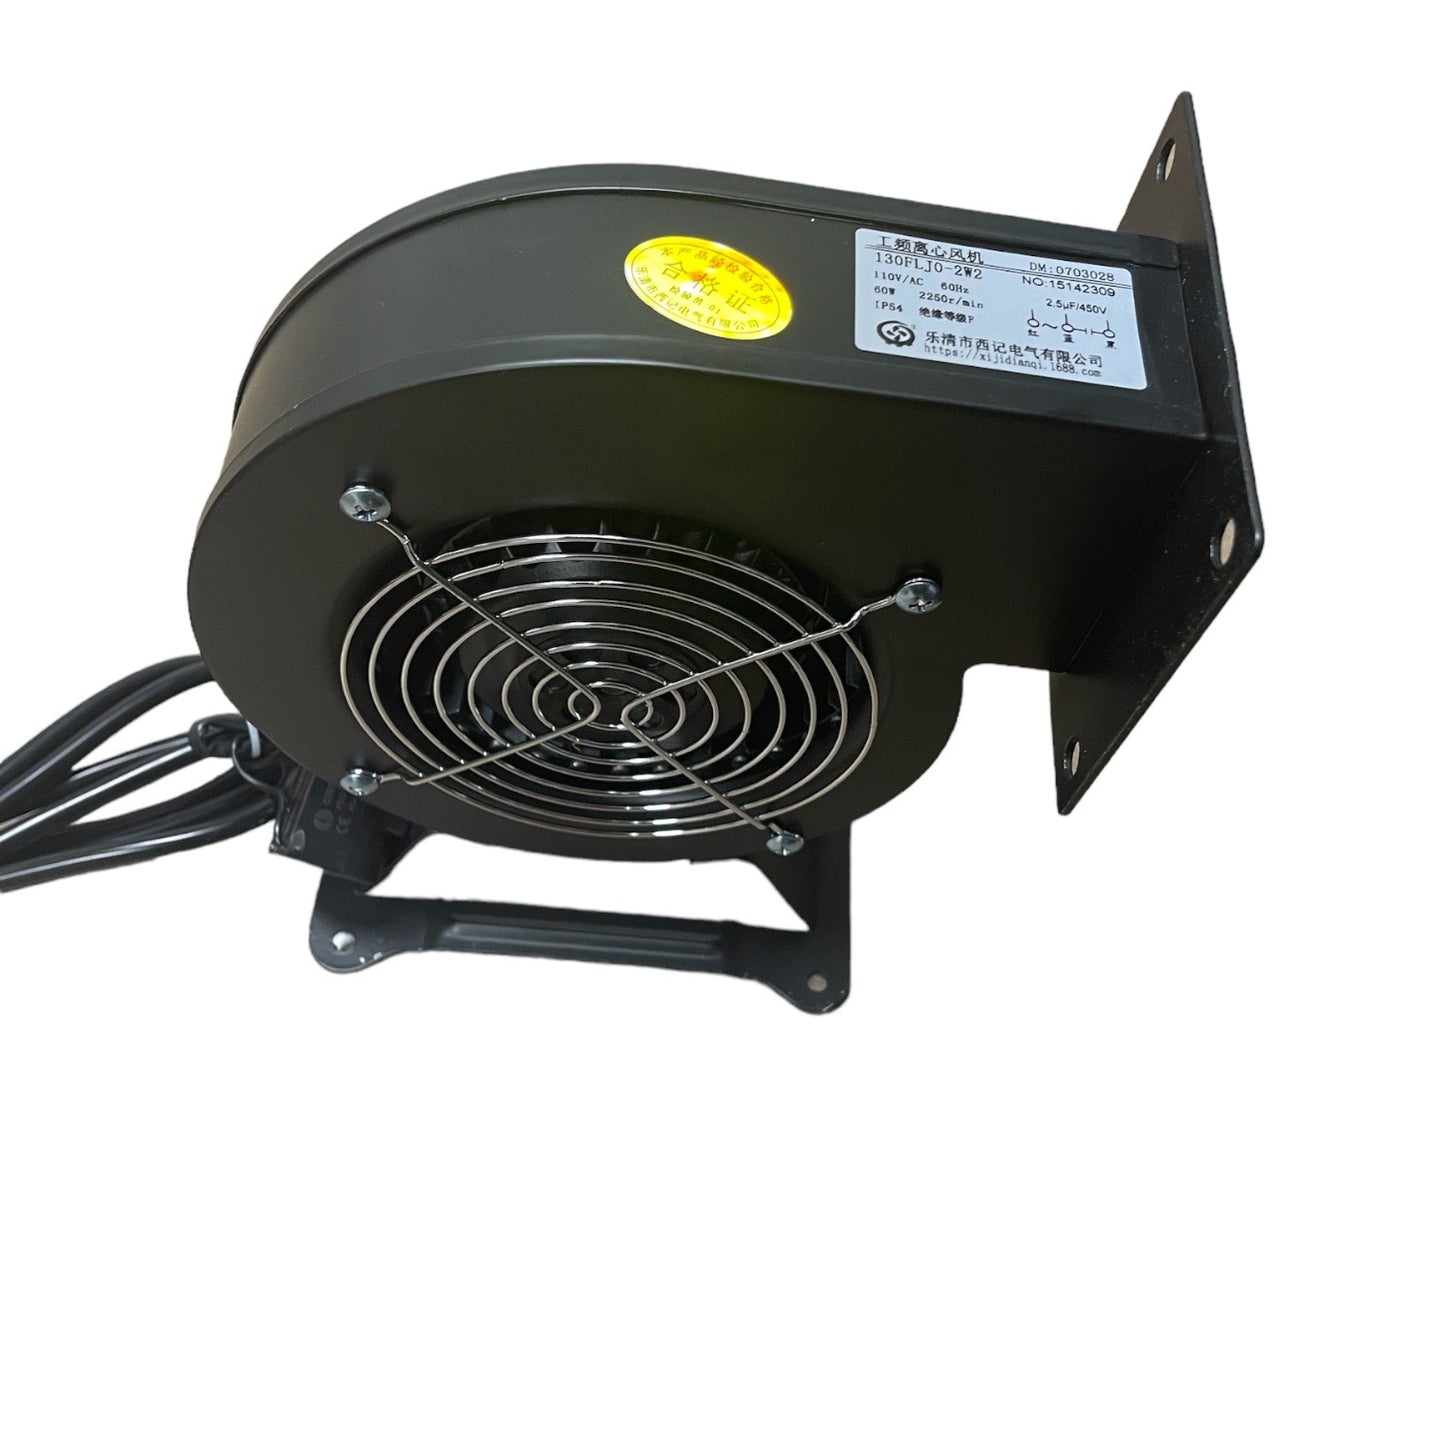 Portable Air Blower for Inflatables Centrifugal Blower Small Metal Case 60W Low Noise and Simple Operation